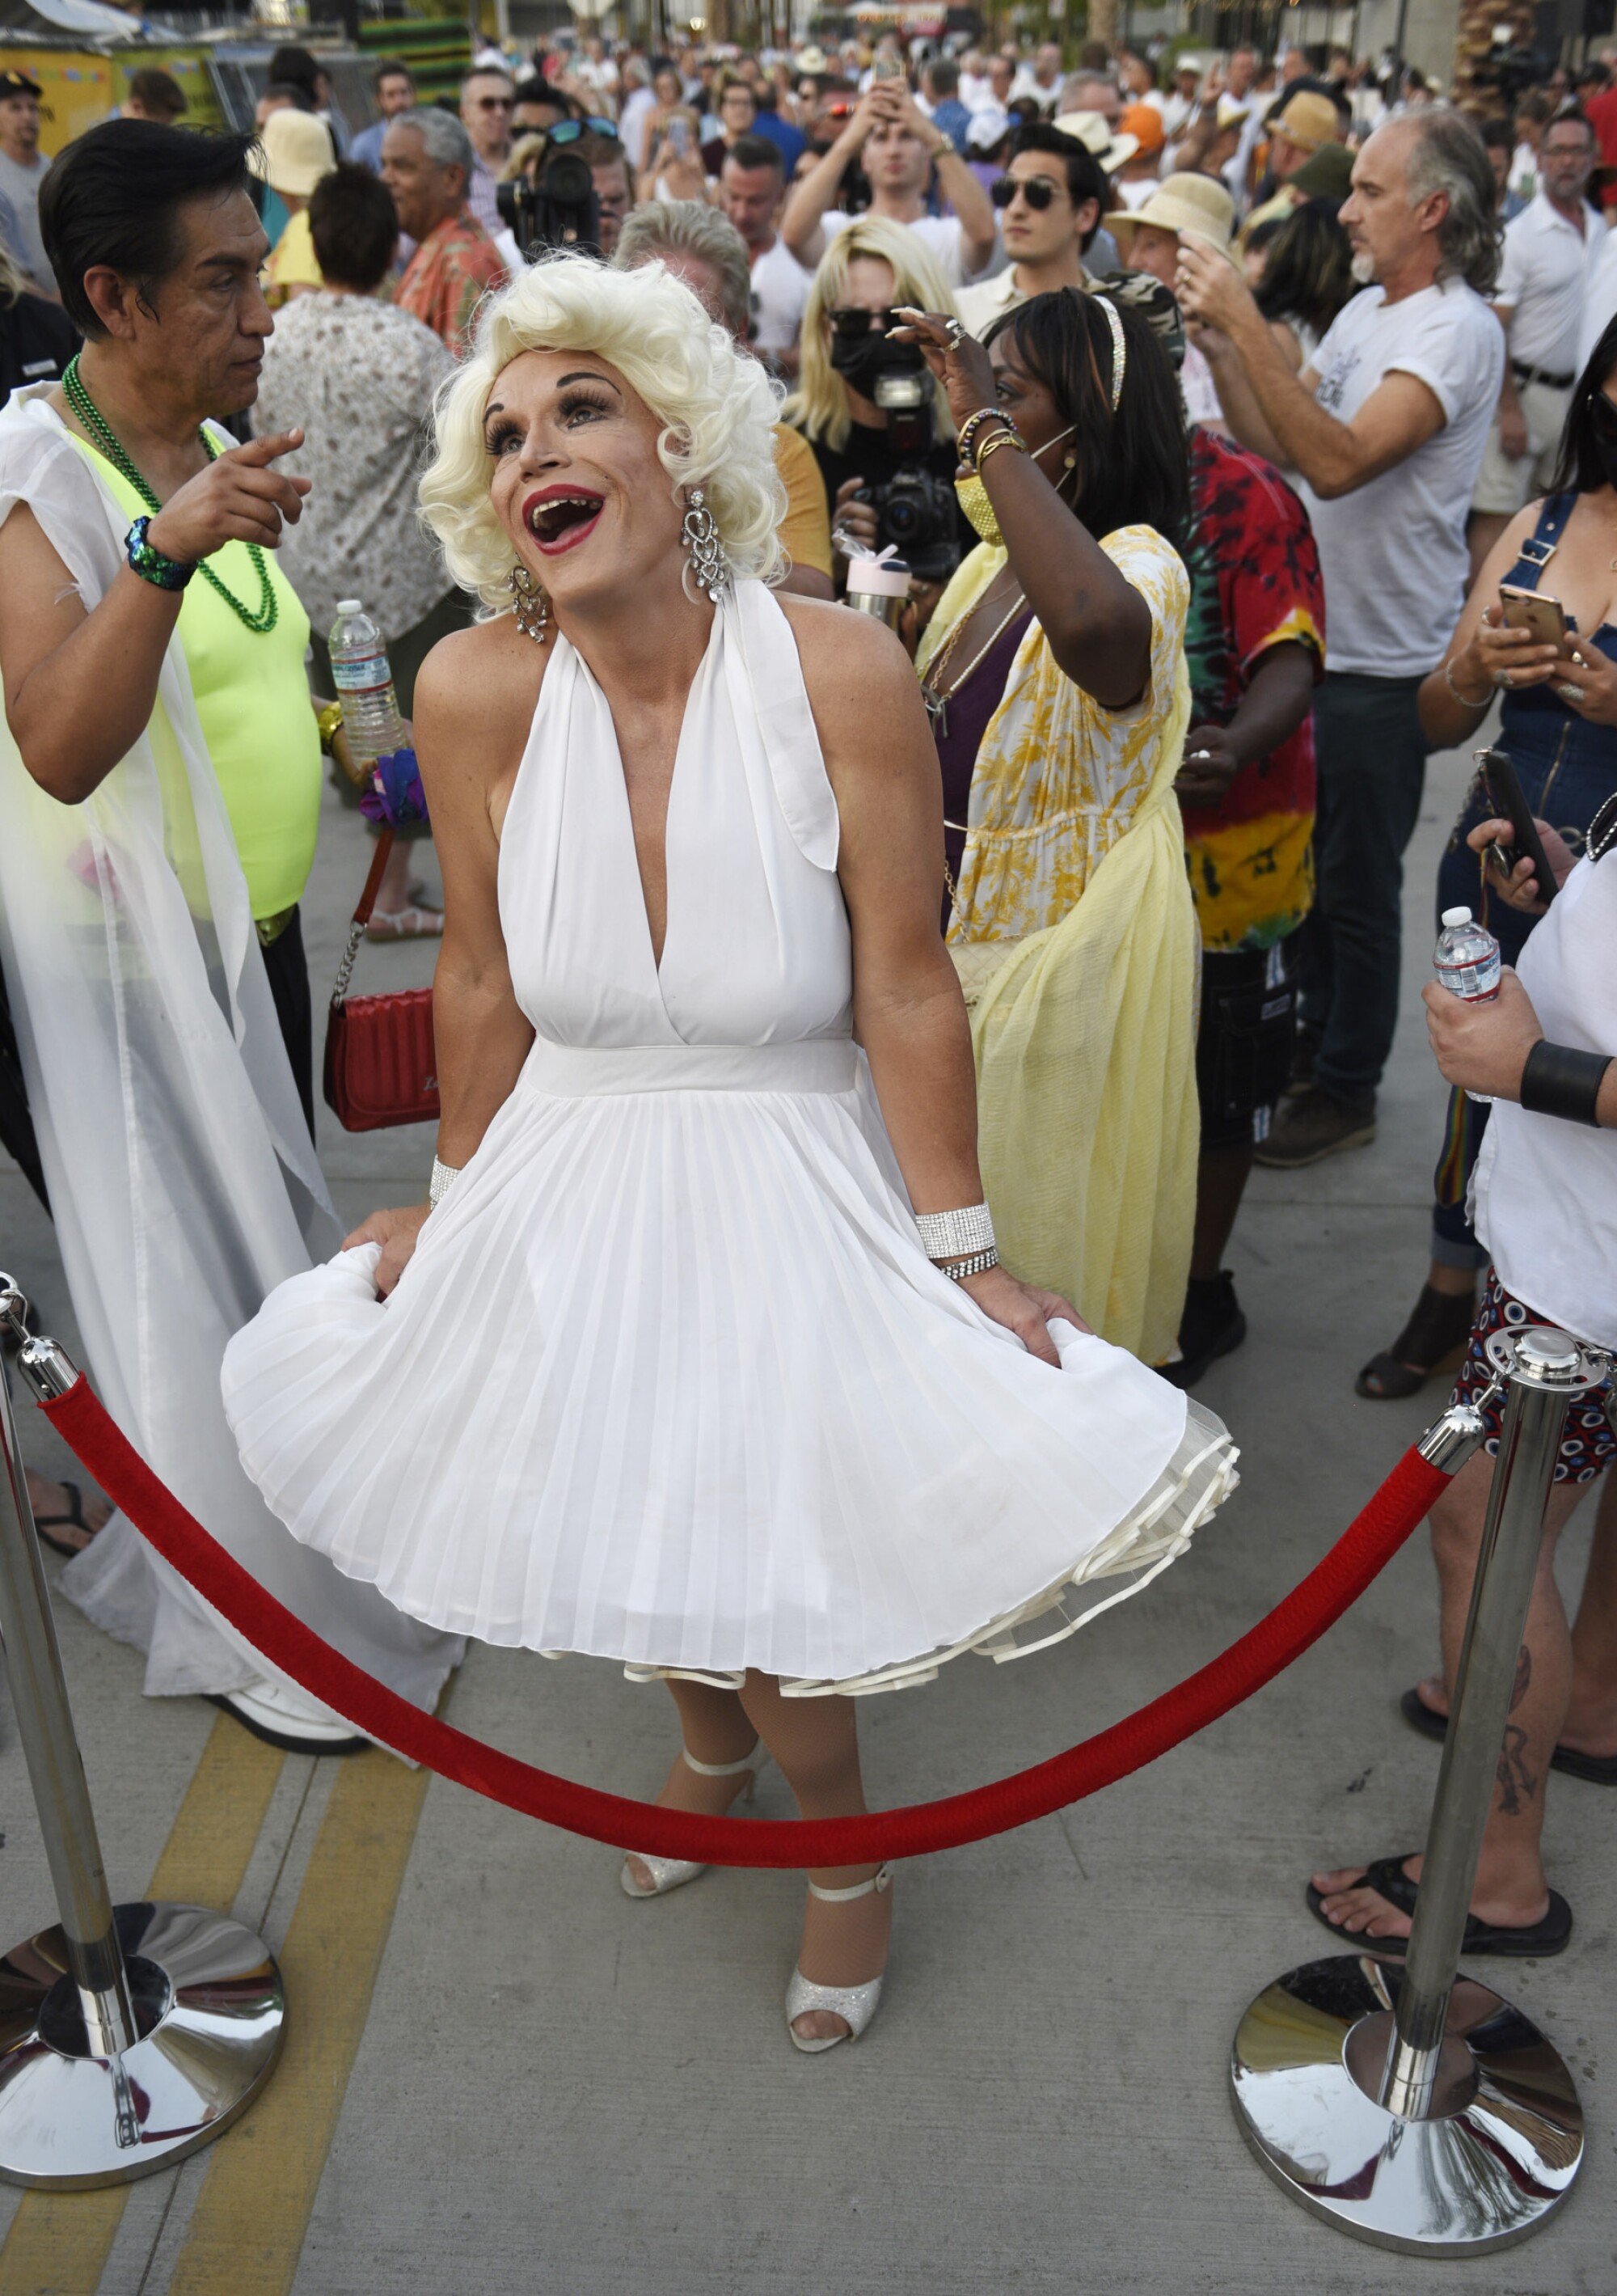 latest news Photos: Marilyn Monroe’s star still shines brightly, 60 years after her death